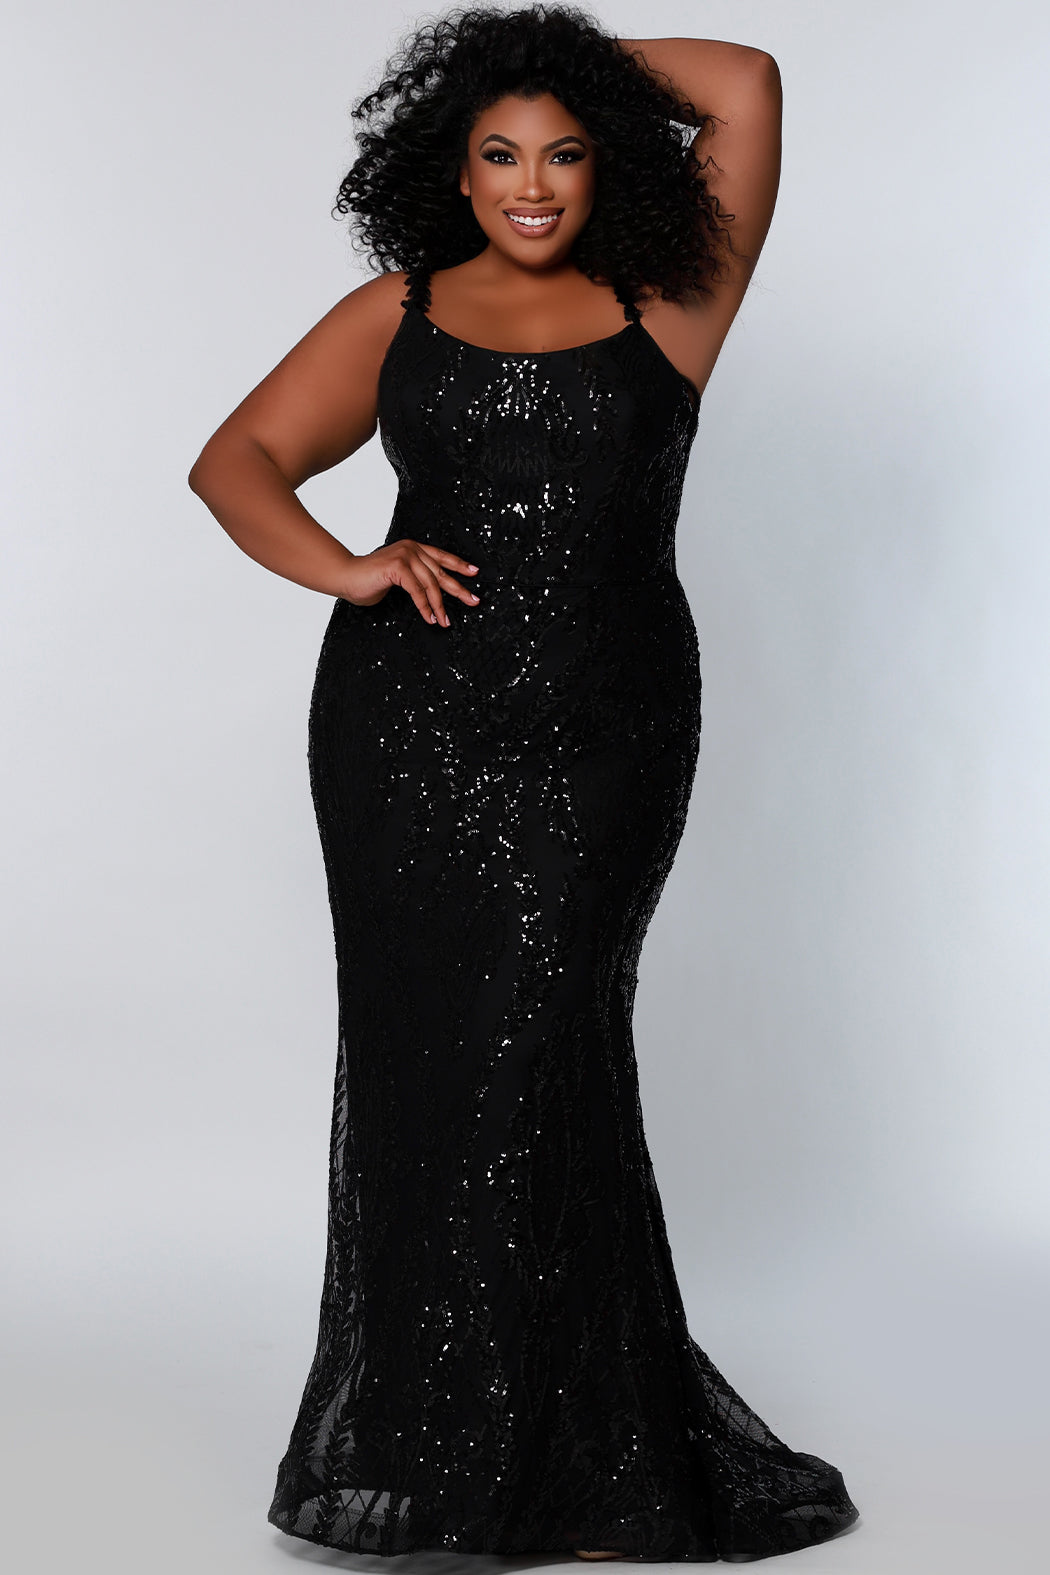 Sydney's Closet SC7332 Long Fitted Sequin Formal Plus Size Prom Dress  Evening Gown SC 7332